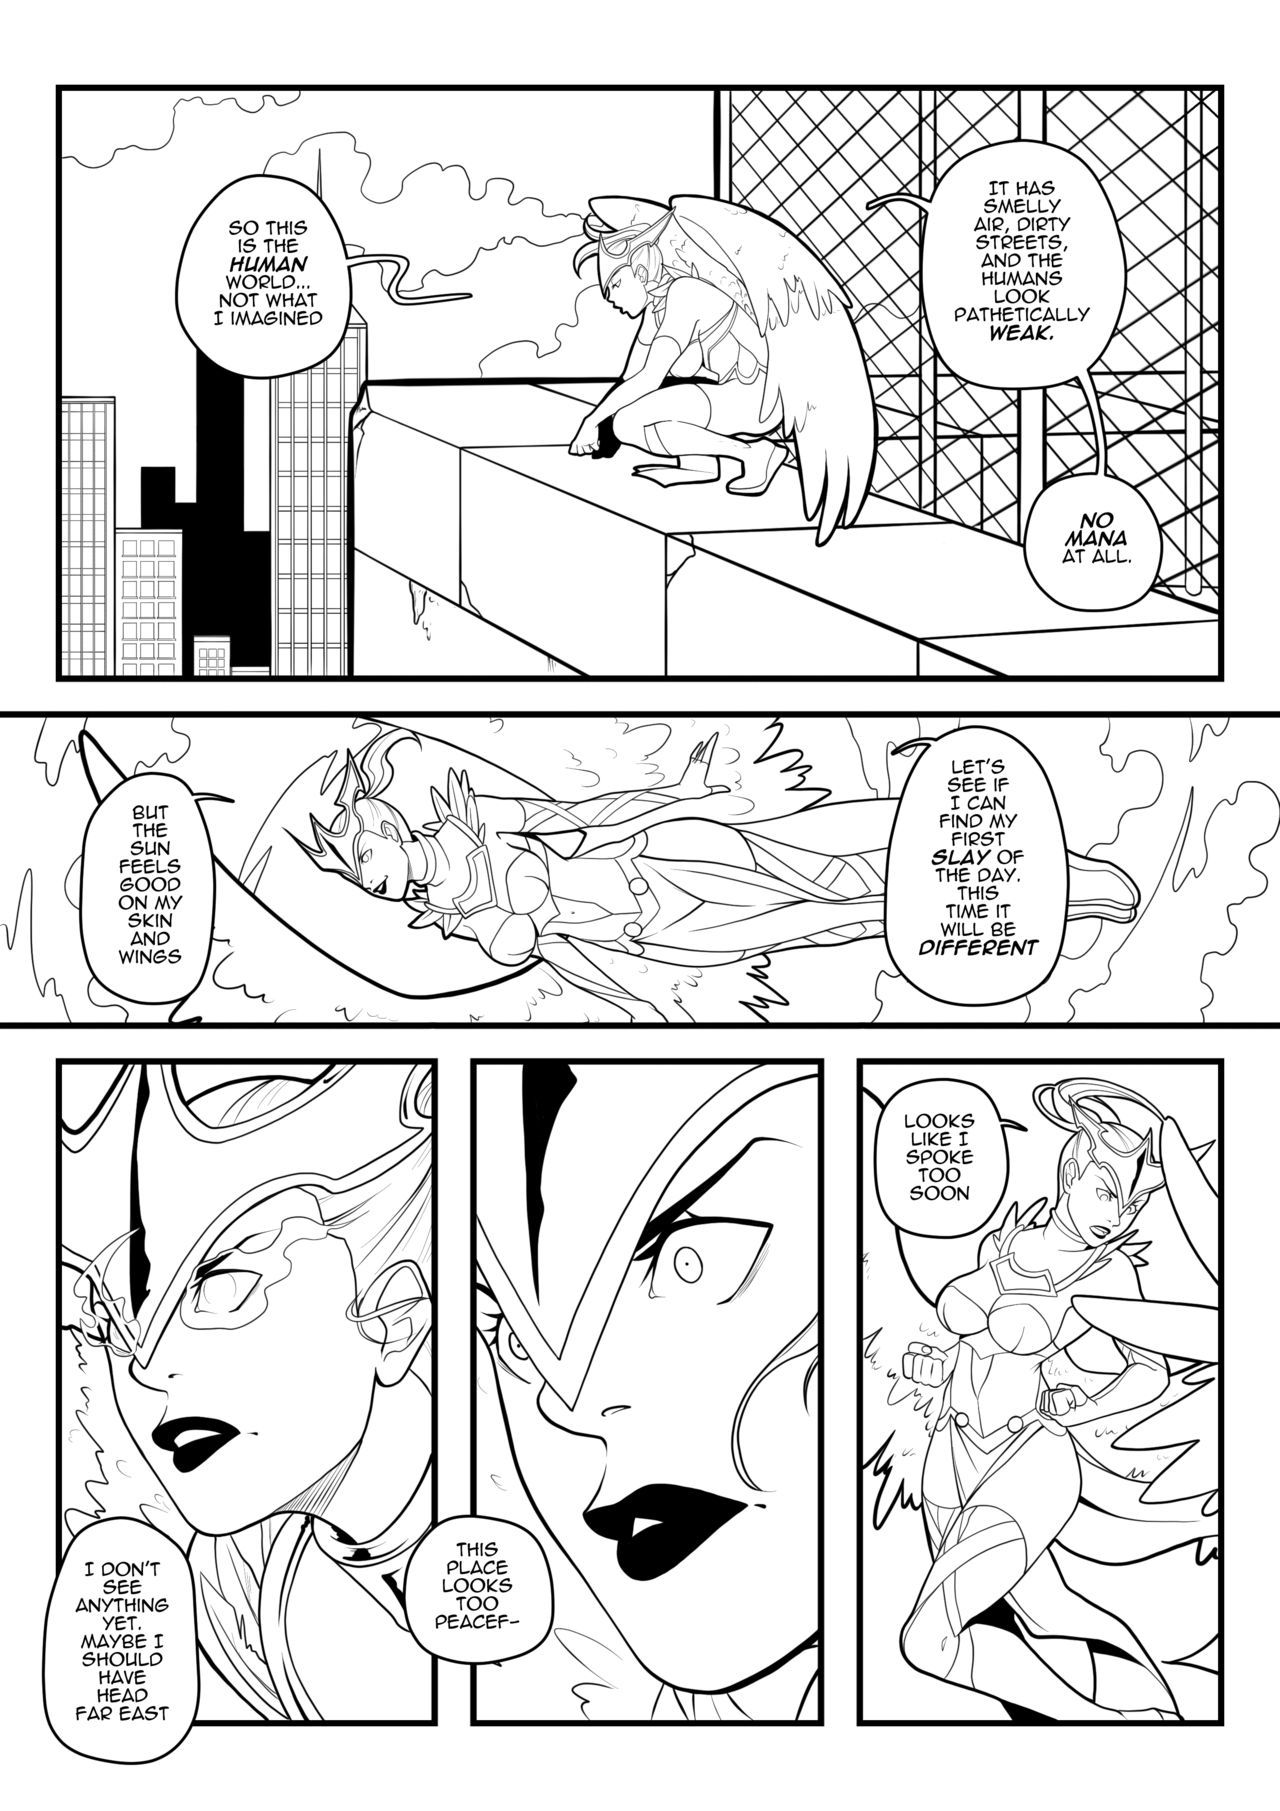 Ayana The ArchAngel [Ongoing] (Lady Valiant Spin-off story) 6